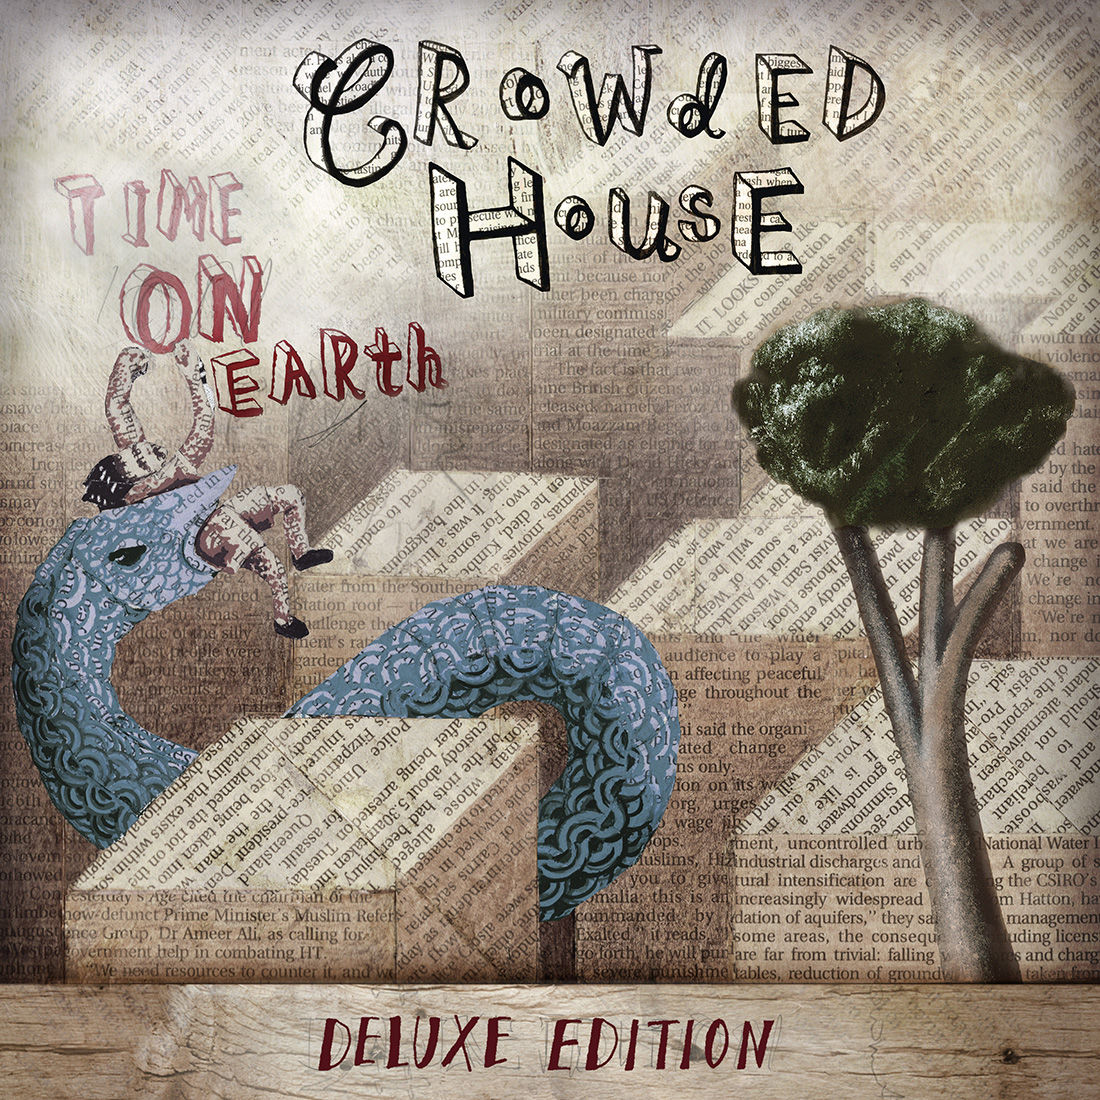 Crowded House - Time On Earth: Deluxe Edition 2CD